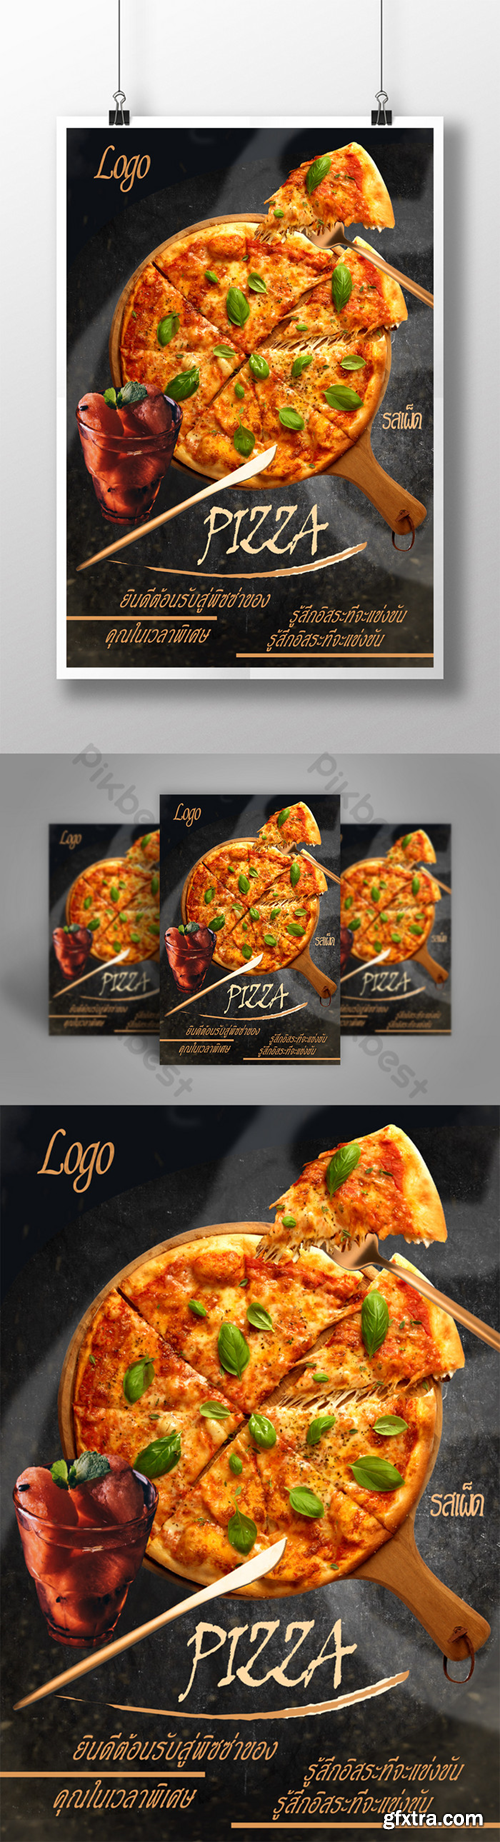 Creative Pizza Food Poster Template PSD